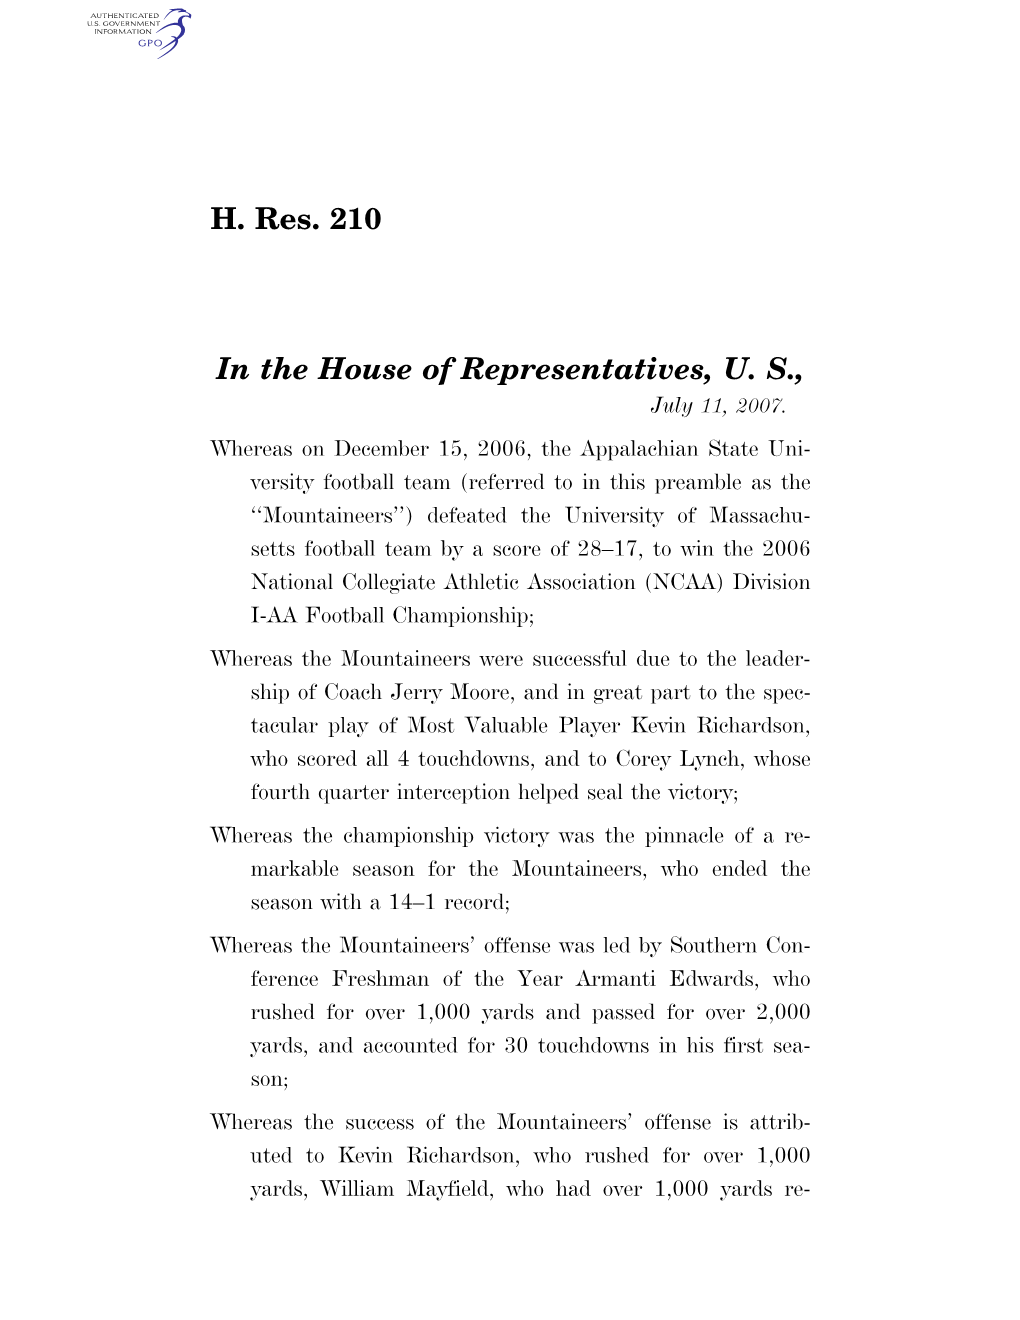 H. Res. 210 in the House of Representatives